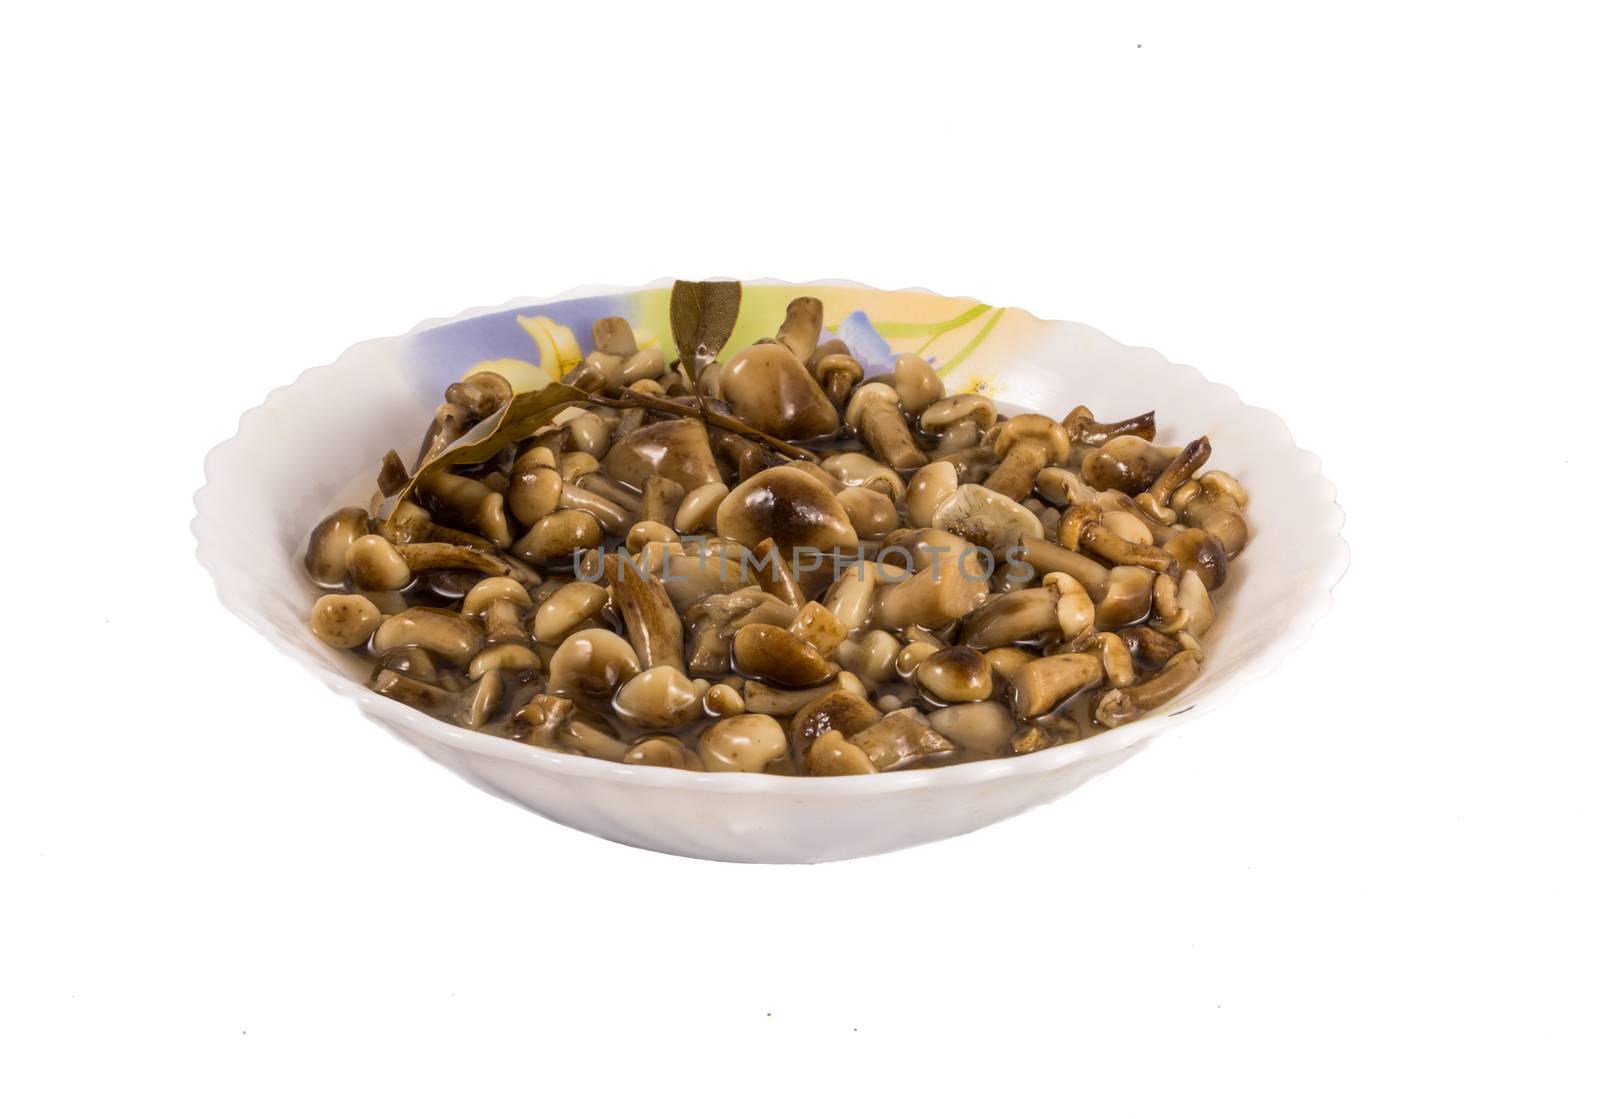 marinated mushrooms in plate on white background